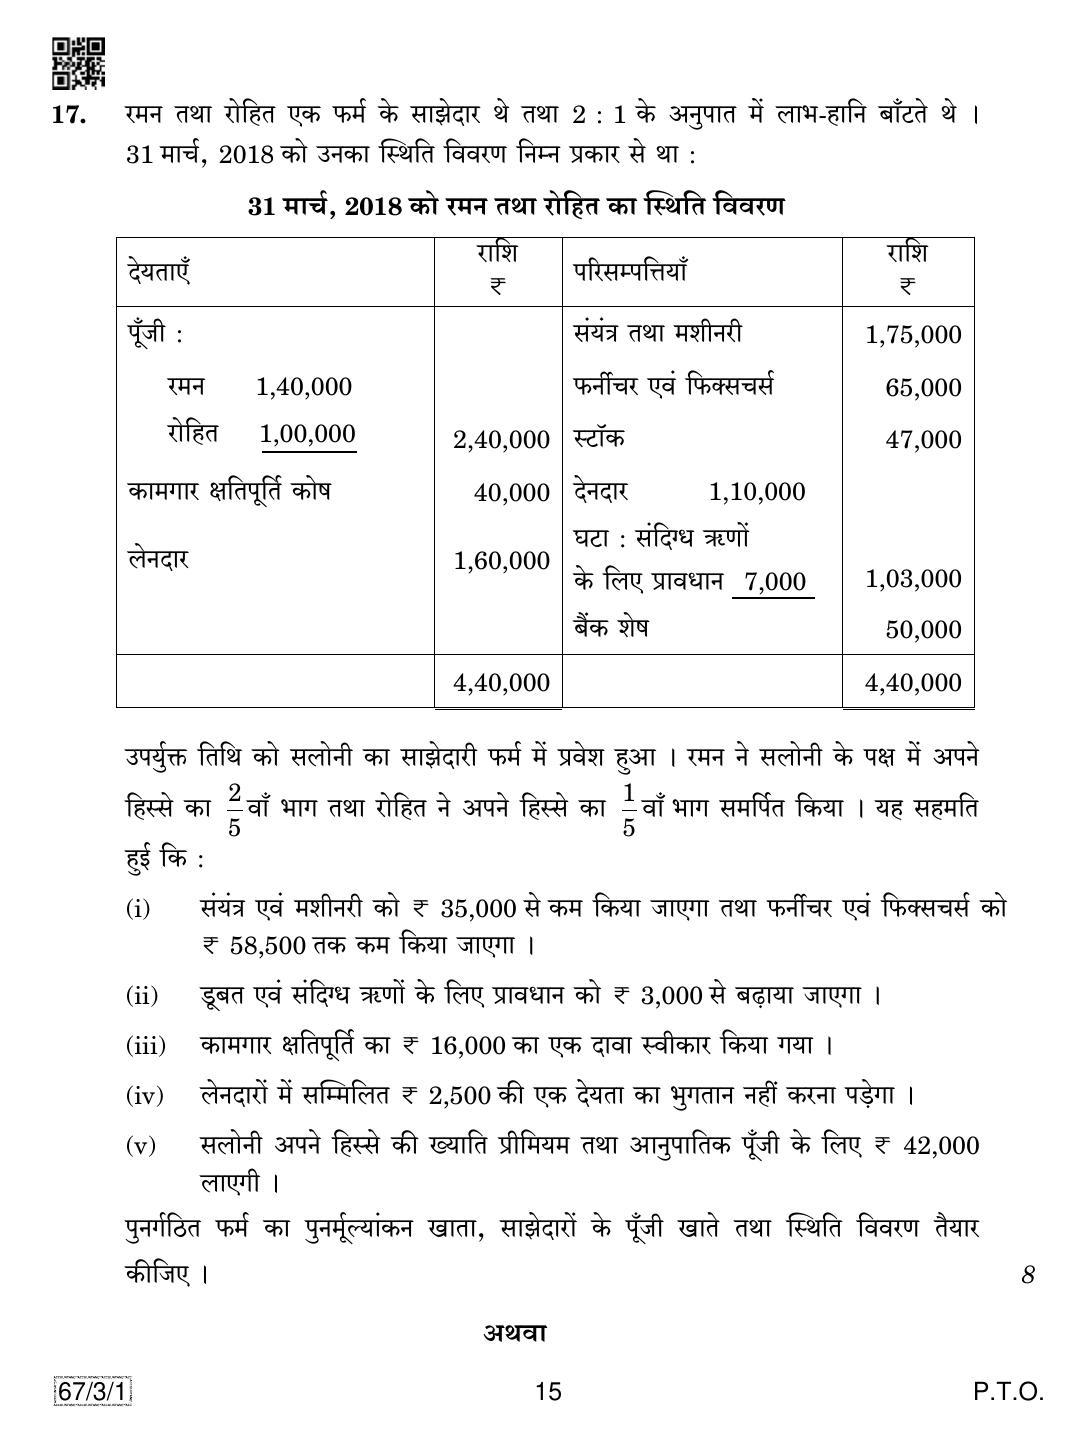 CBSE Class 12 67-3-1 Accountancy 2019 Question Paper - Page 15